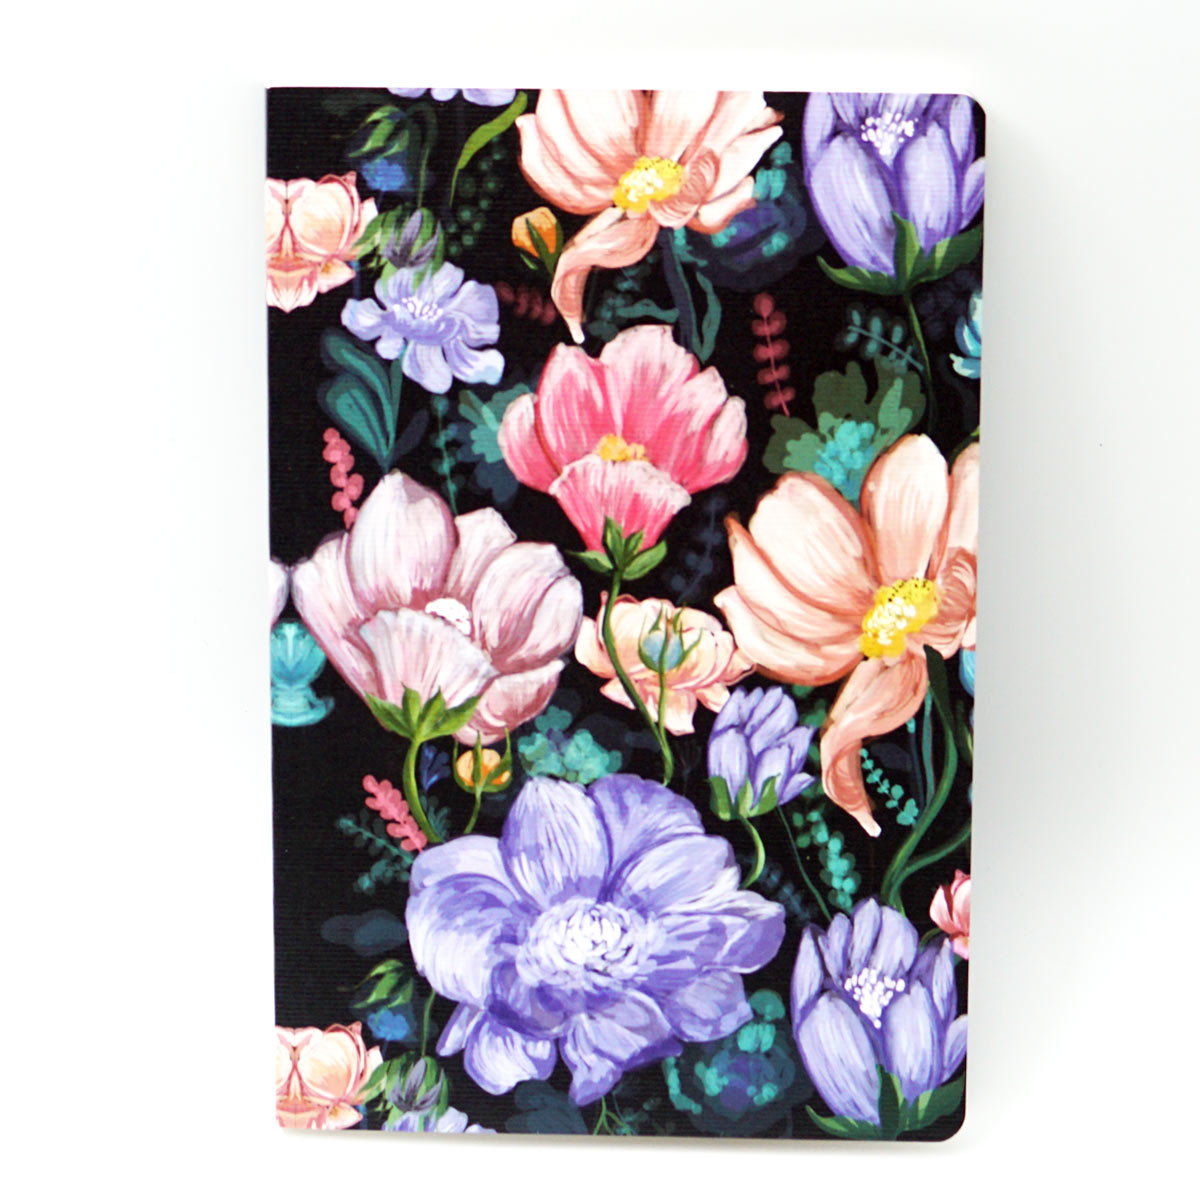 Factor B6 Black Color with Big Flower Design Soft Bound Ruled Notebook 90 GSM With 112 Pages SKU 50200